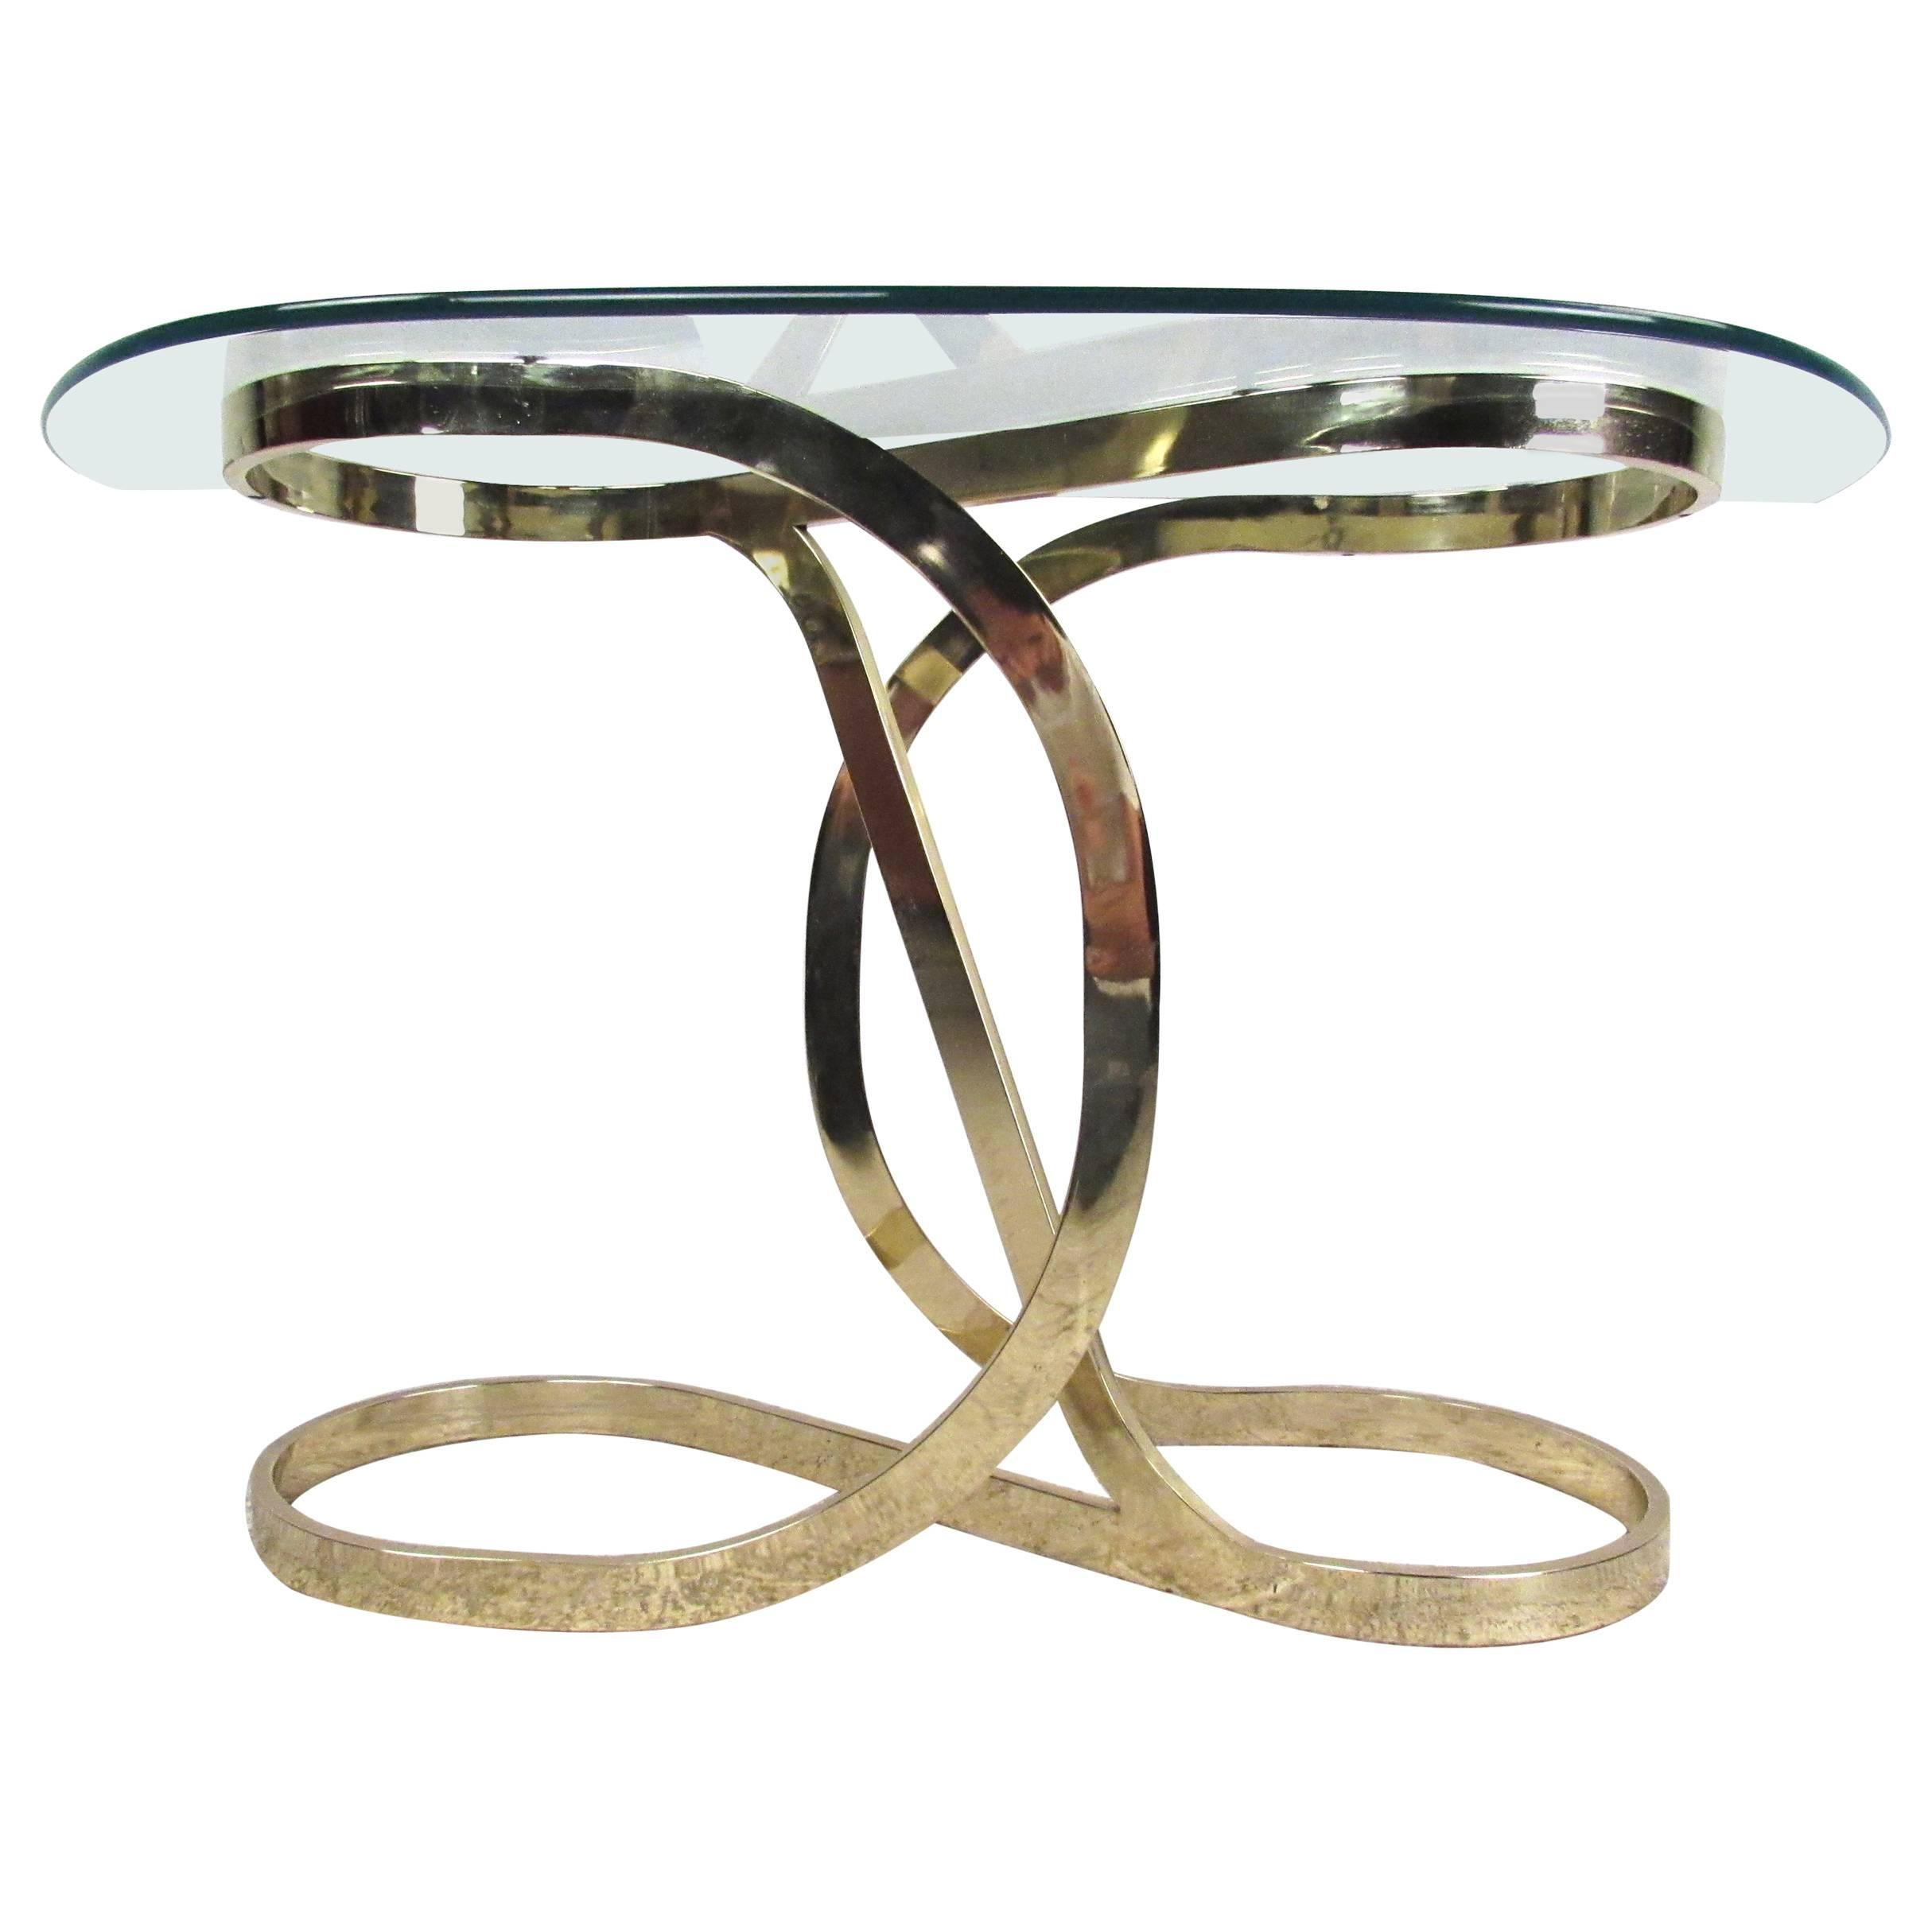 This unique vintage brass console table features an elegant sculpted infinity design with curved demilune glass top. Wonderful modern design makes this an ideal hall or entry table, perfect for luxurious home or business display. Please confirm item